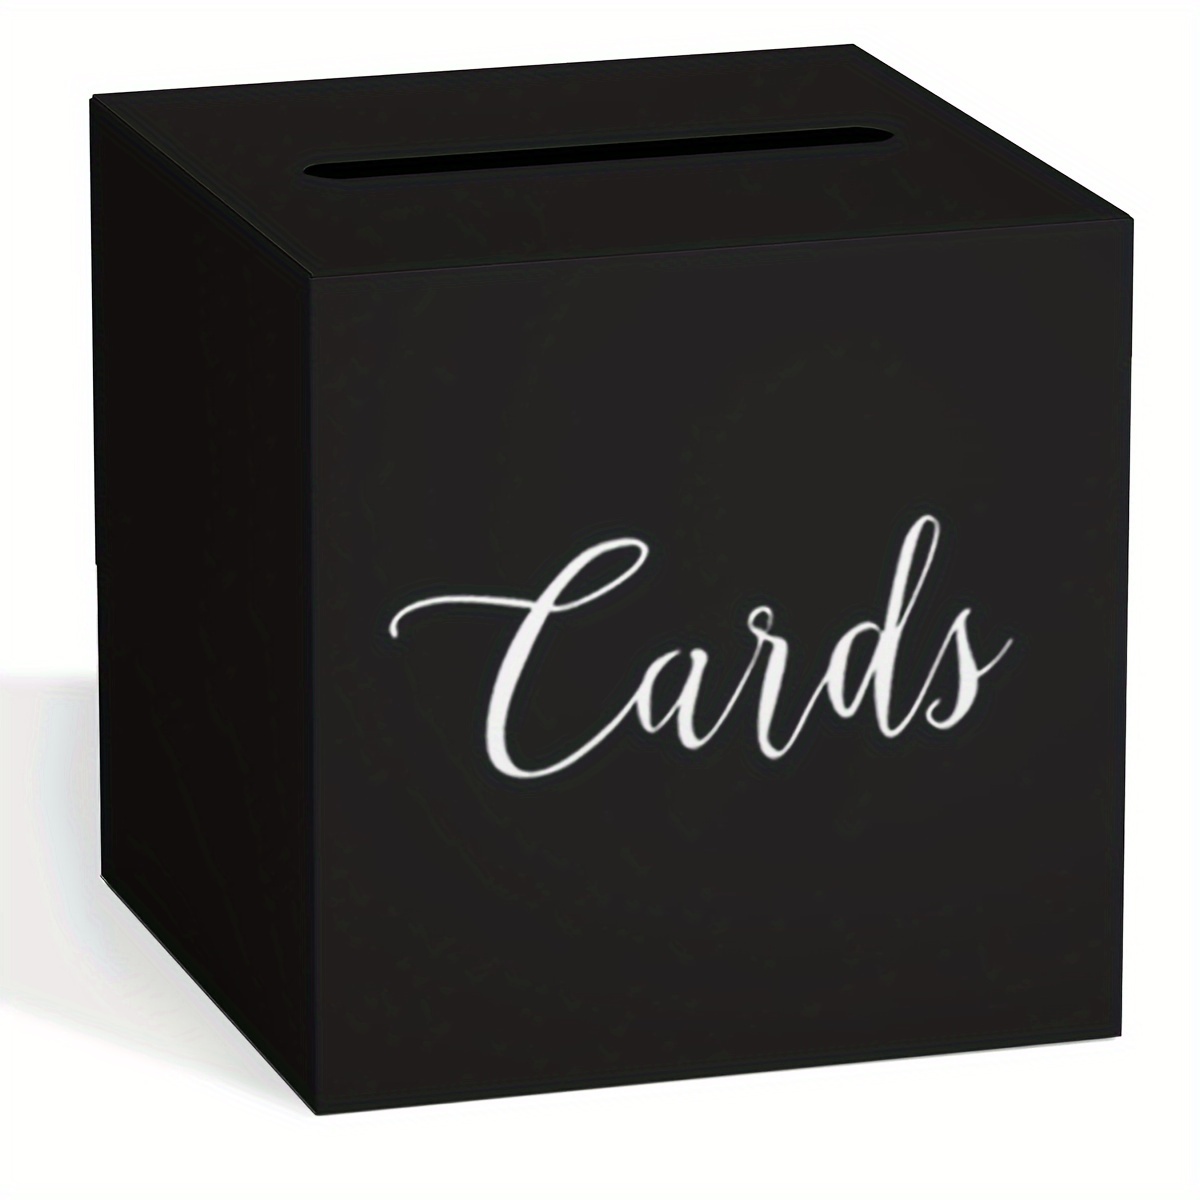 

Elegant Black Card Box With Silvery Foil Design - 8.7" Gift Card Holder For Weddings, Bridal Showers, Graduations, Birthdays, Retirement Parties & Anniversaries